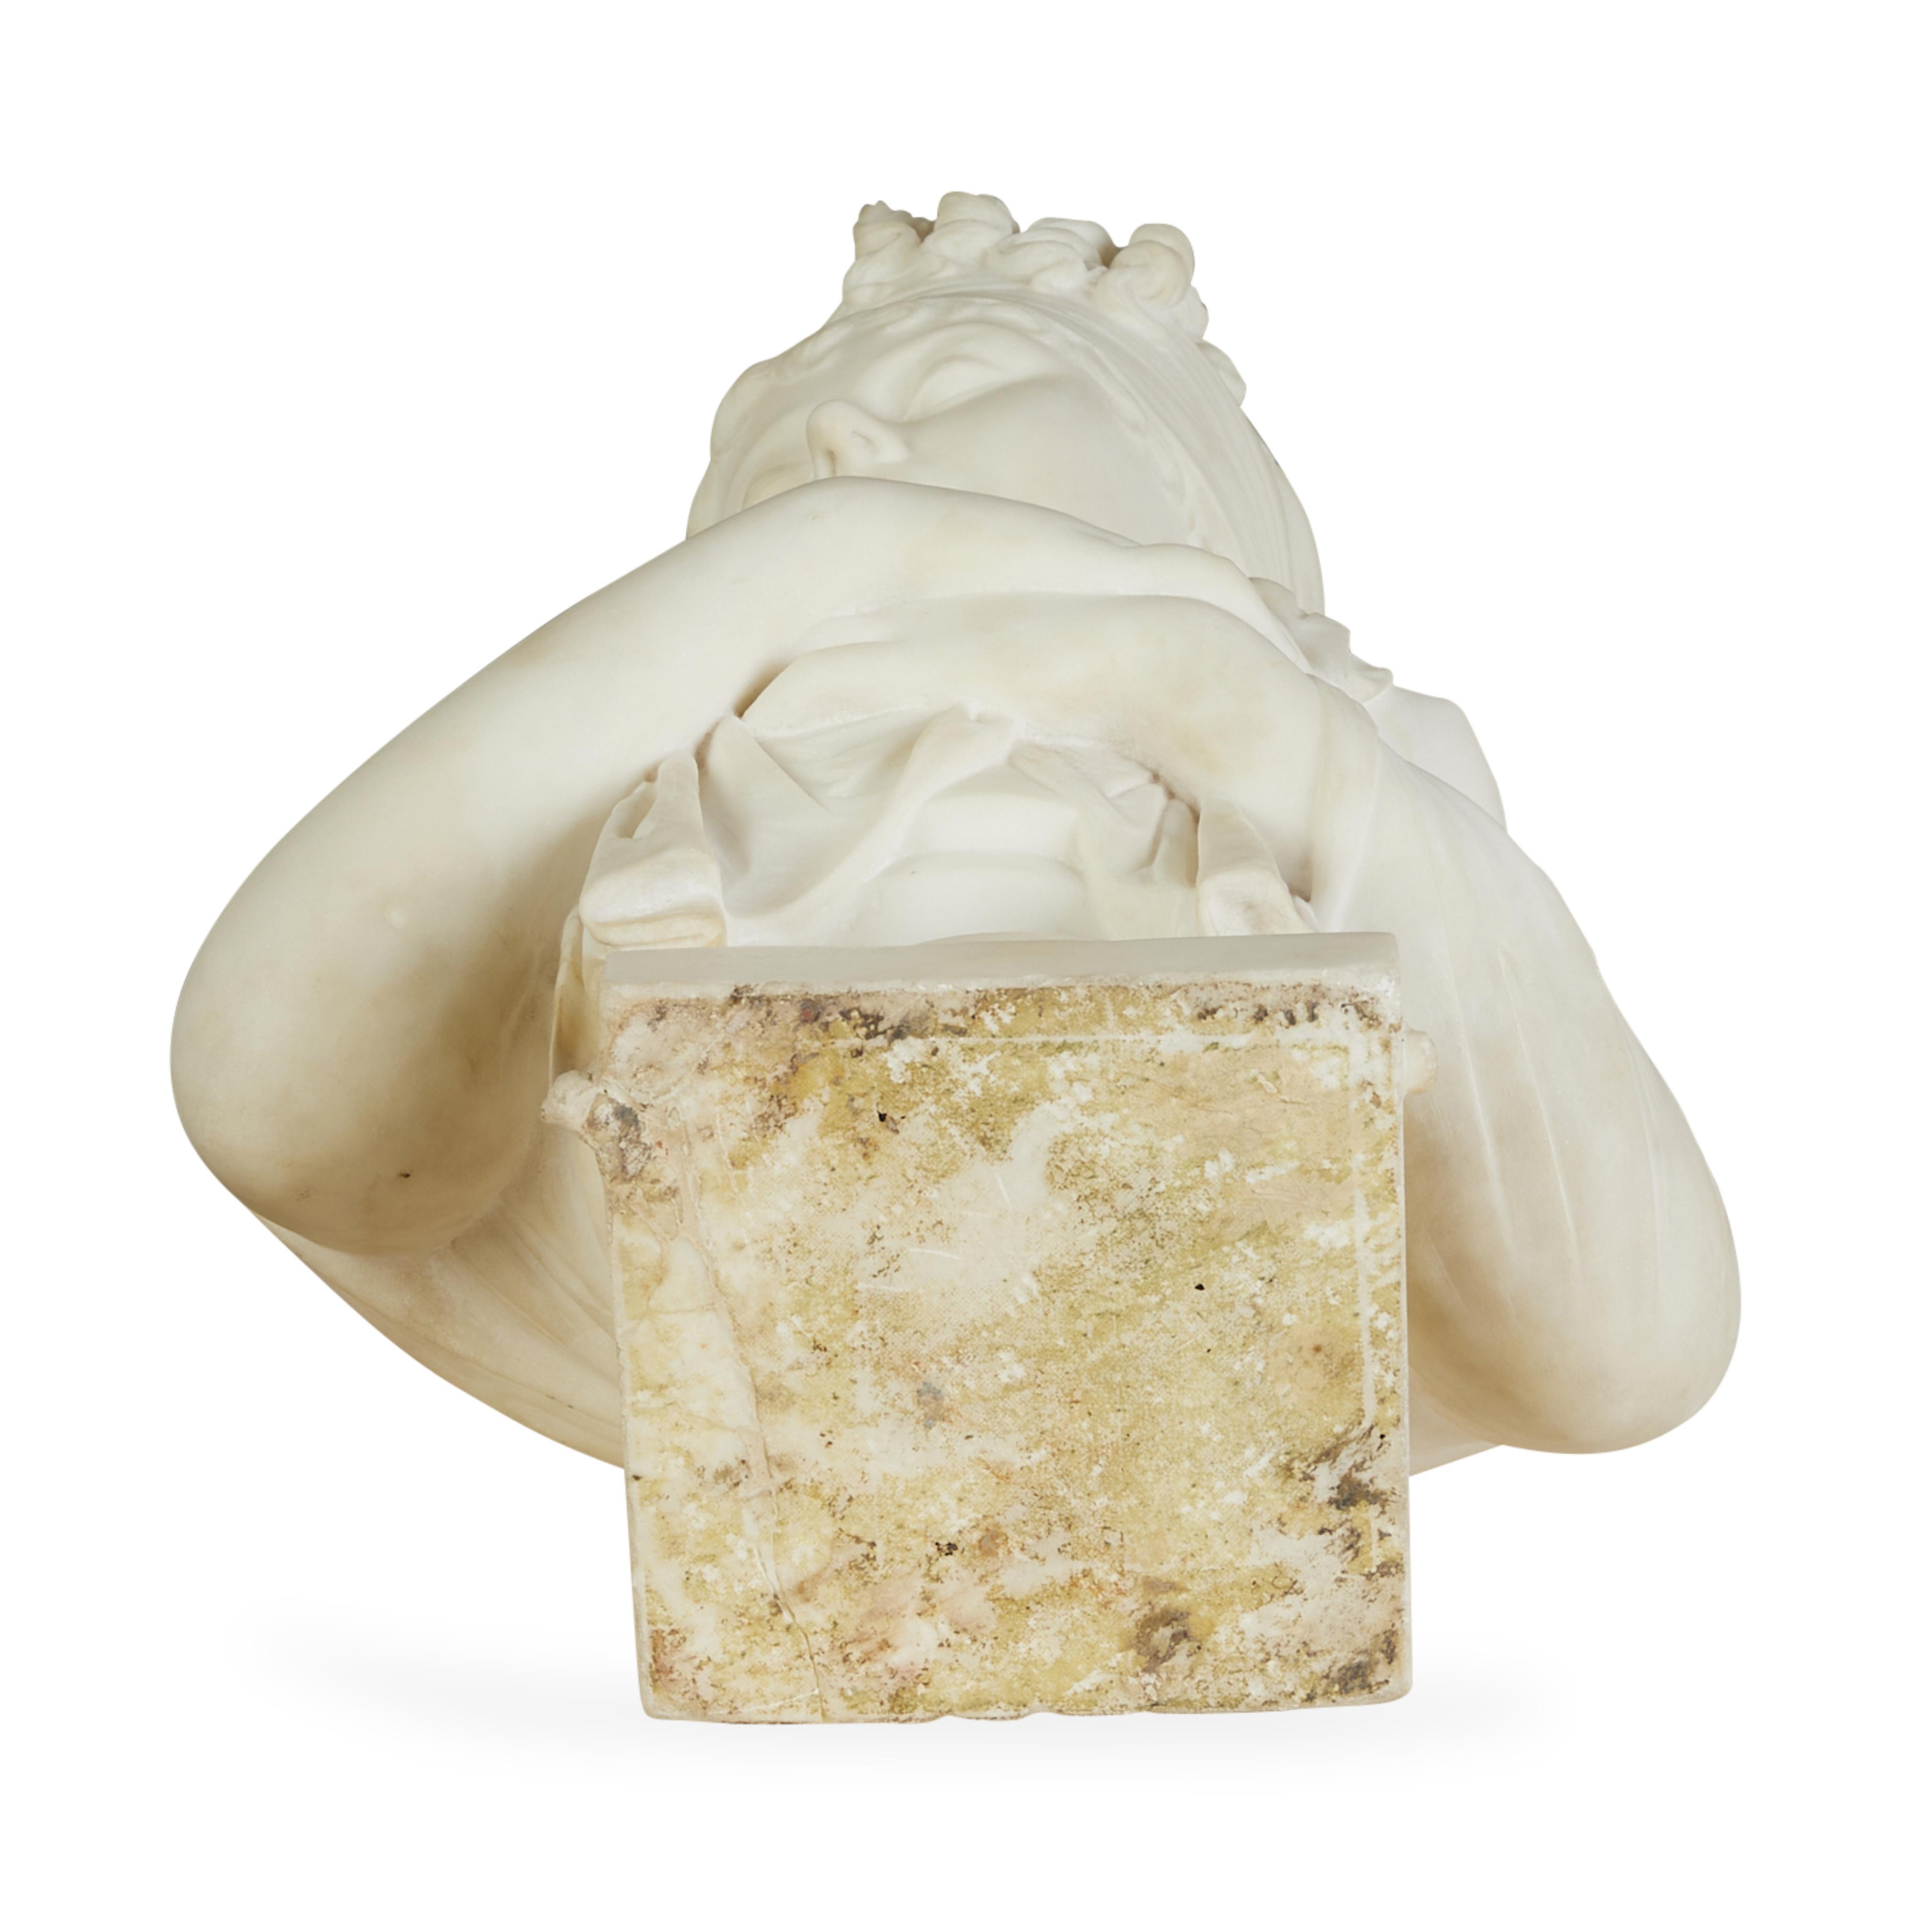 After Joseph Chinard "Madame Recamier" Marble Bust - Image 8 of 9